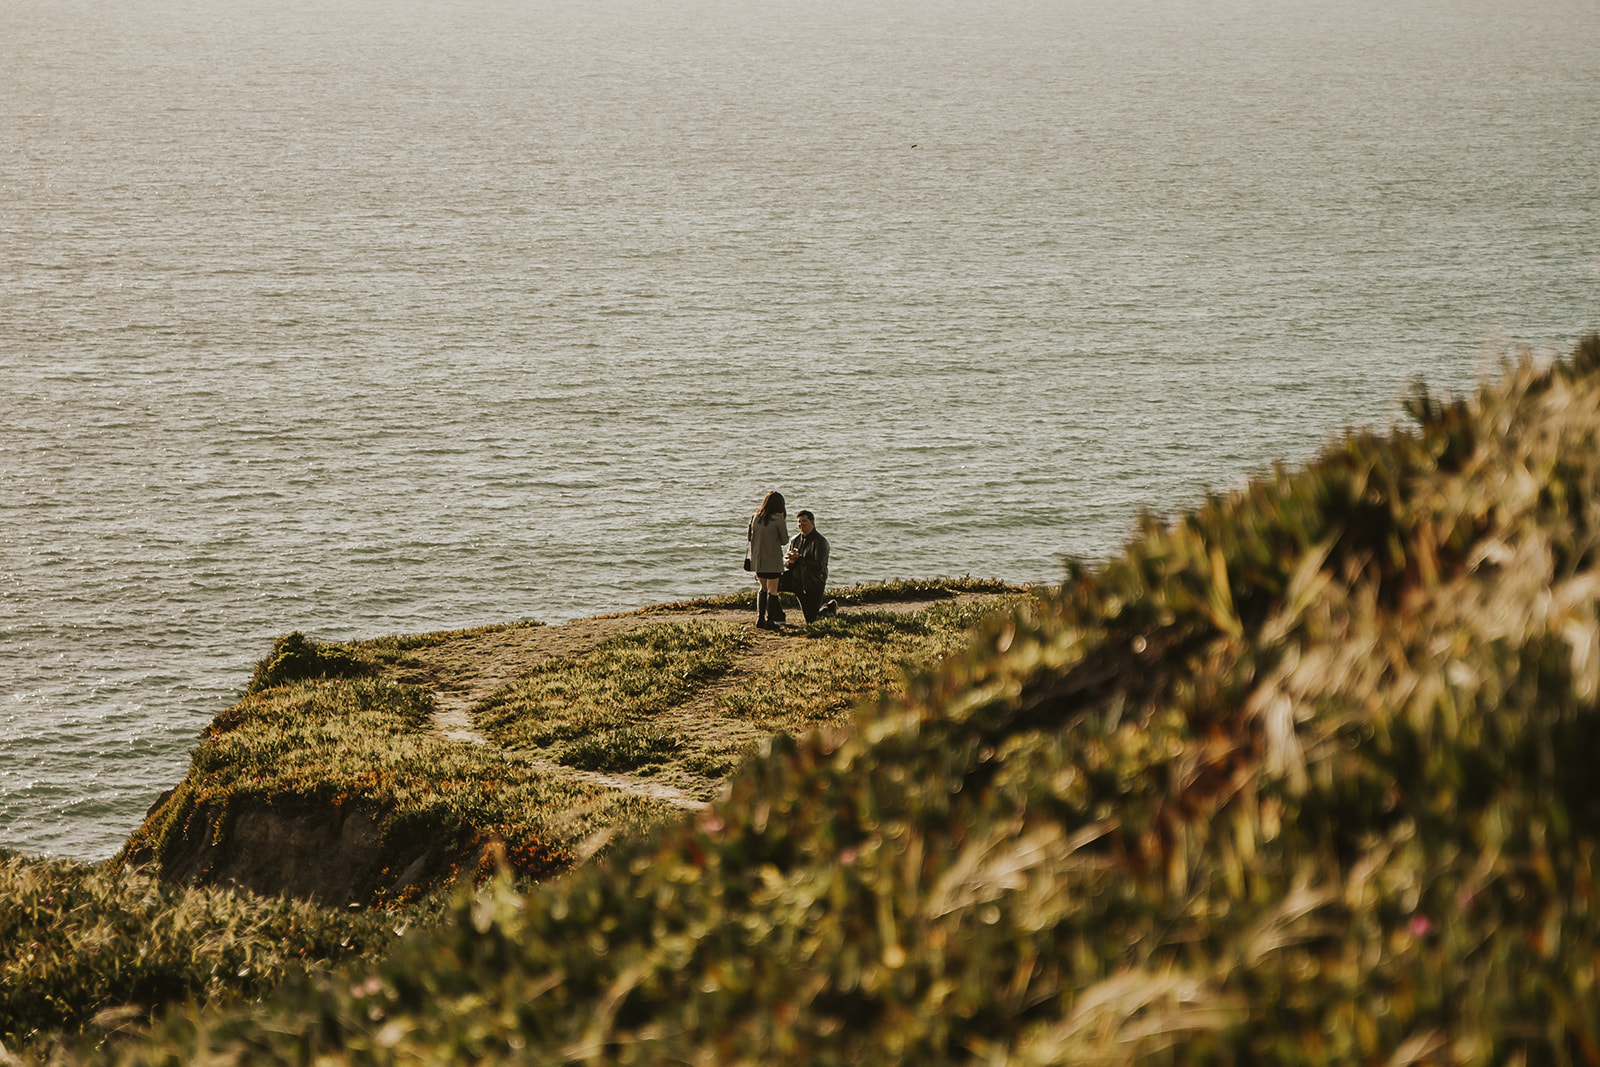 Man proposing to woman on the cliffs of Pacifica, California